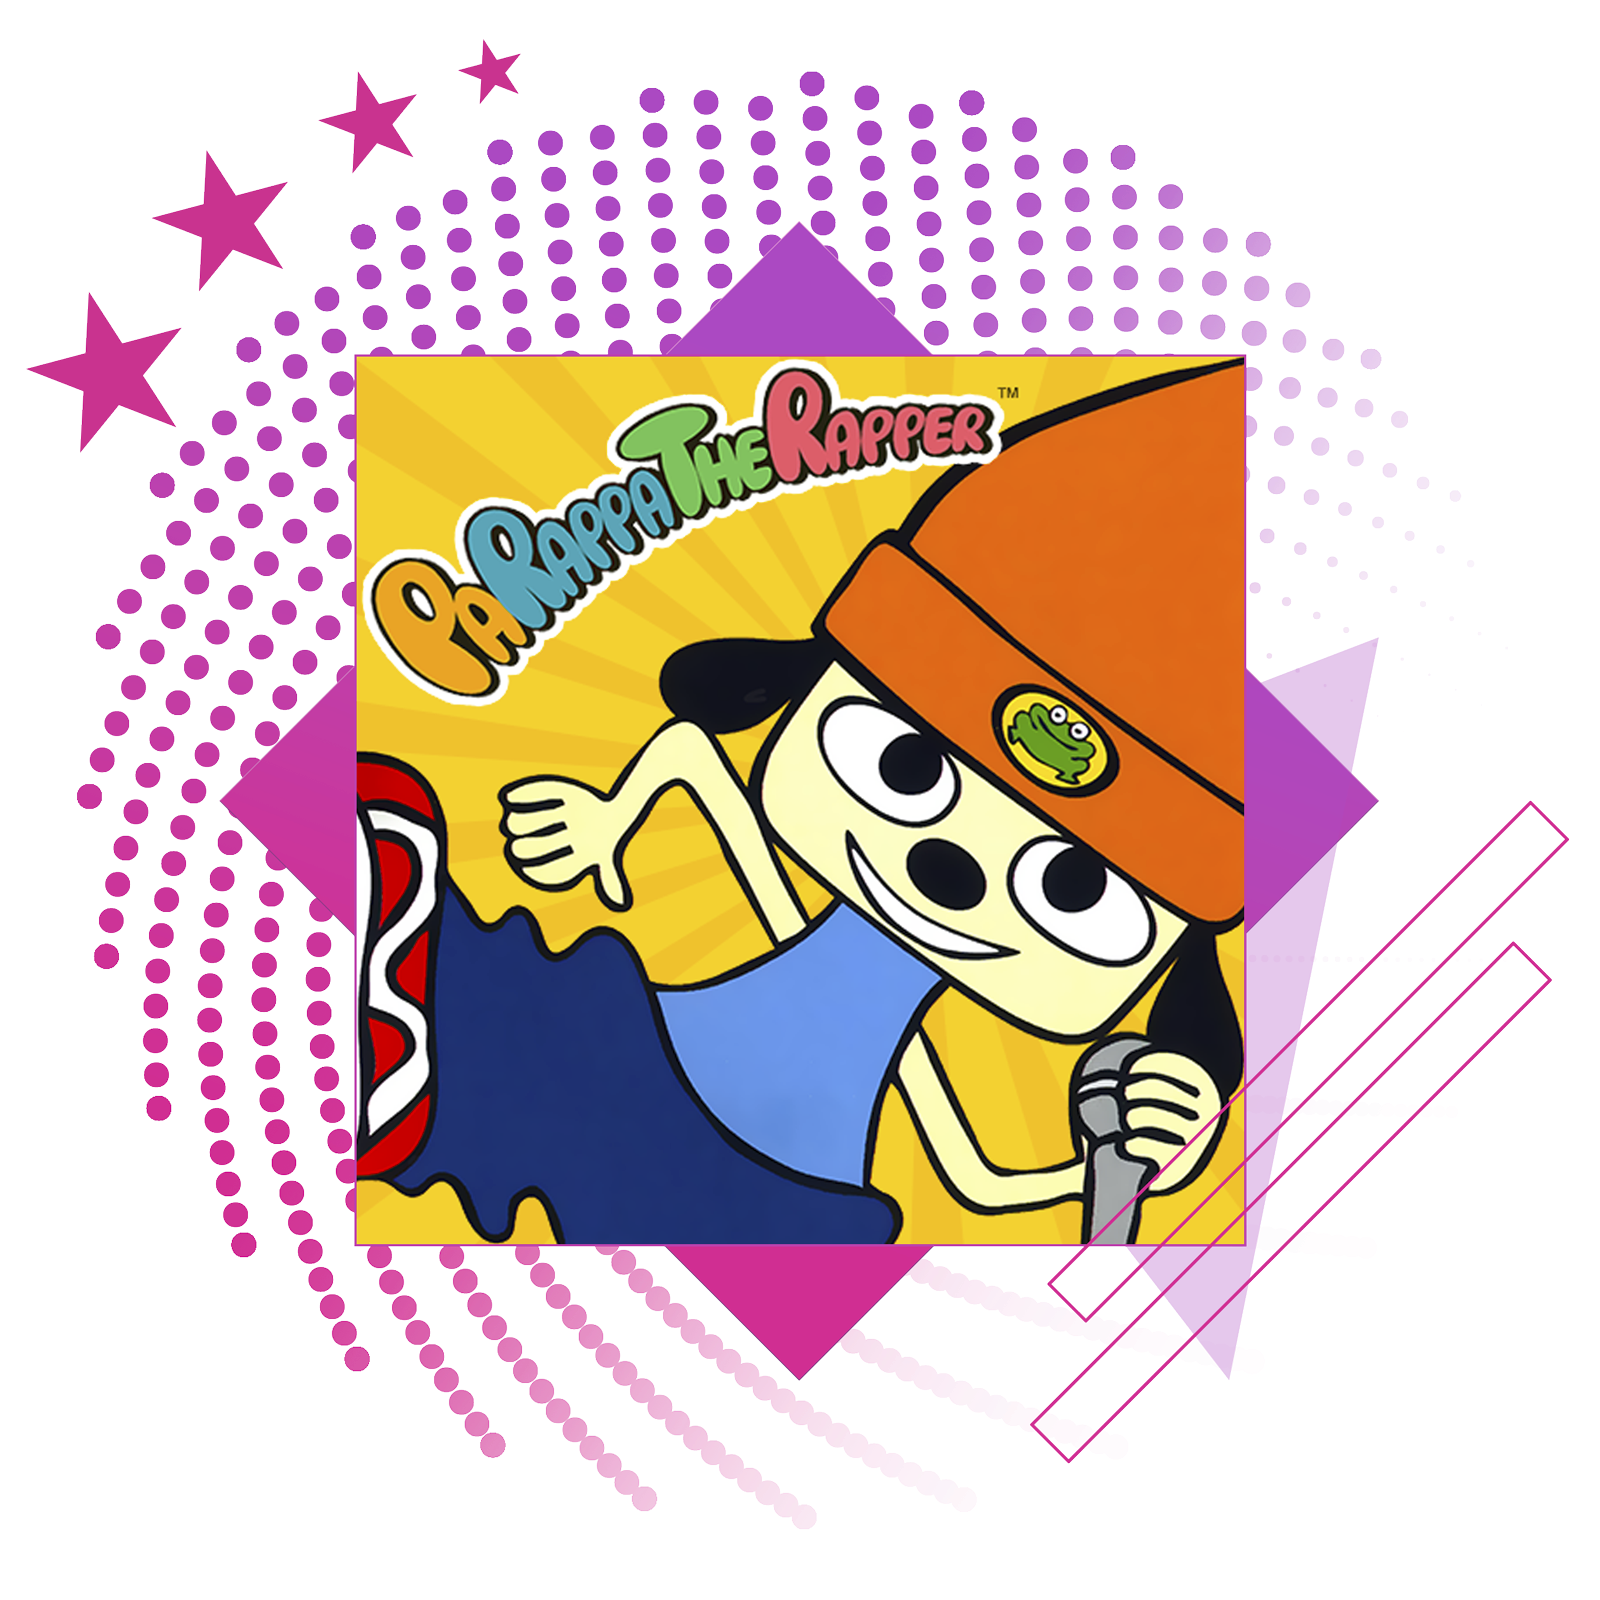 Best rhythm games feature image, featuring key art from PaRappa the Rapper Remastered.